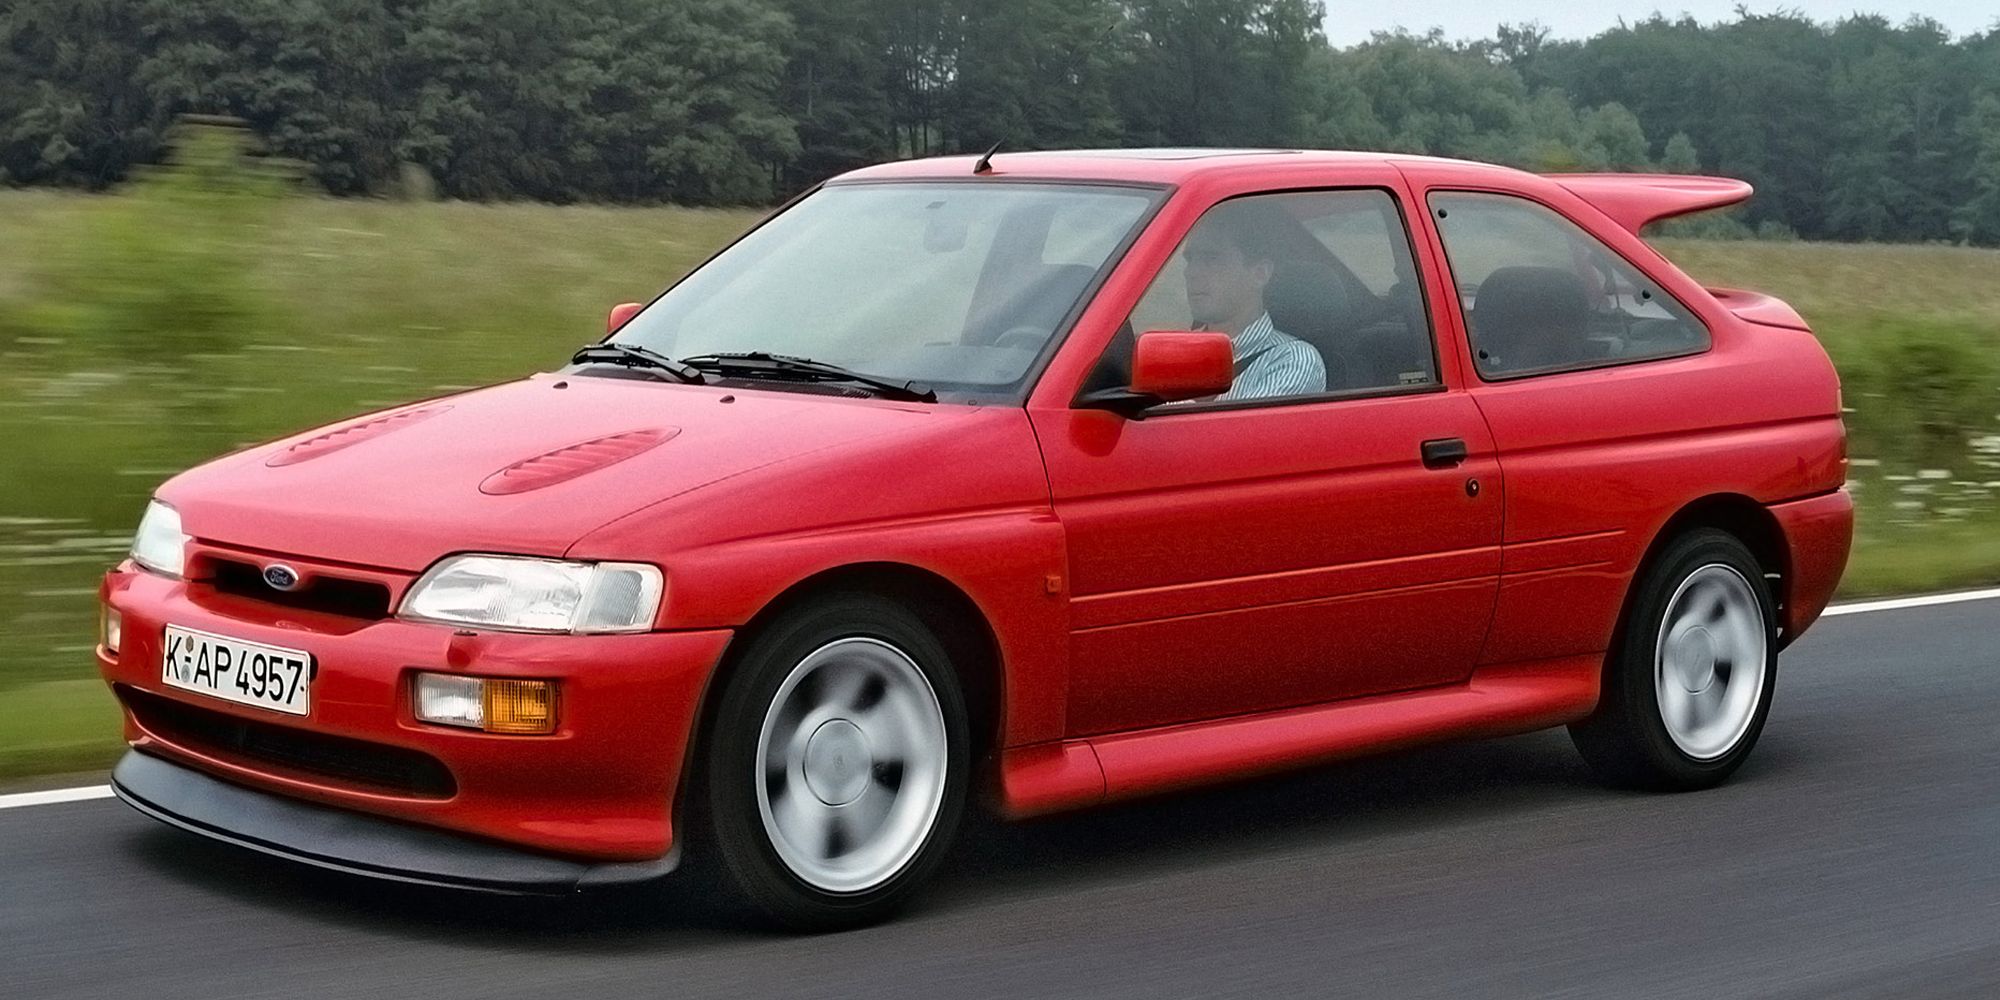 The front of the Escort RS Cosworth